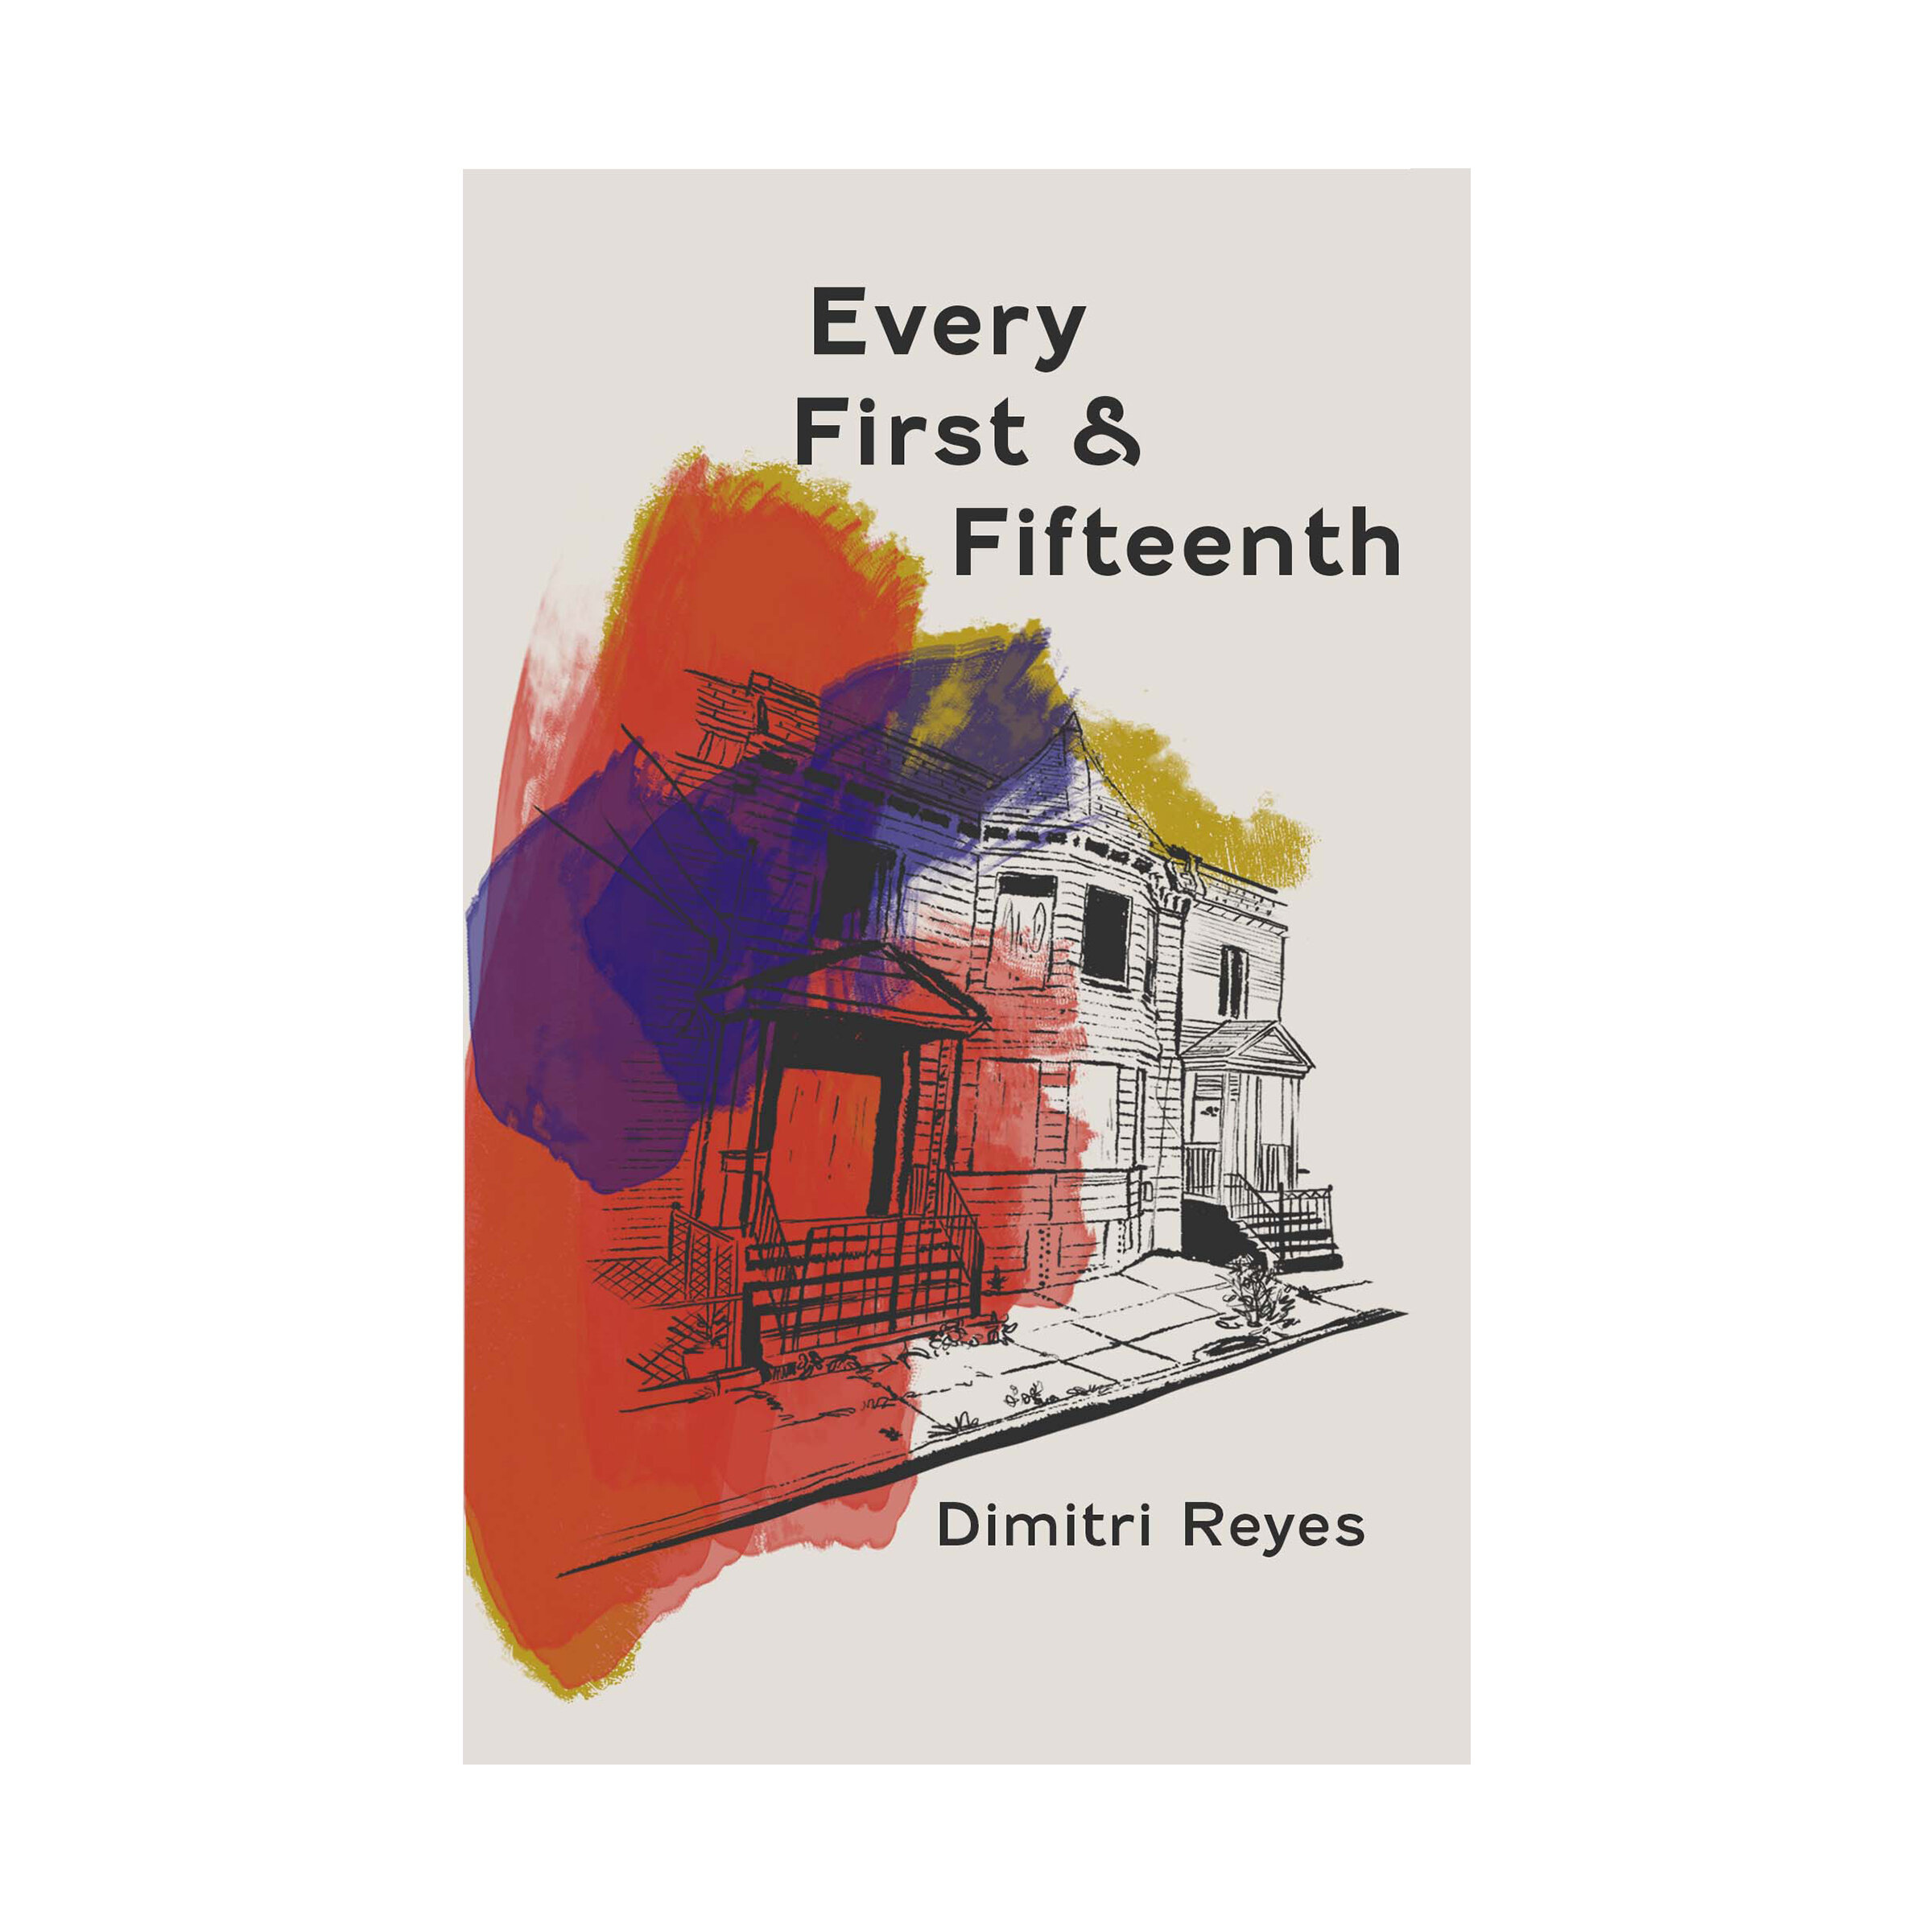 Every First & Fifteenth by Dimitri Reyes